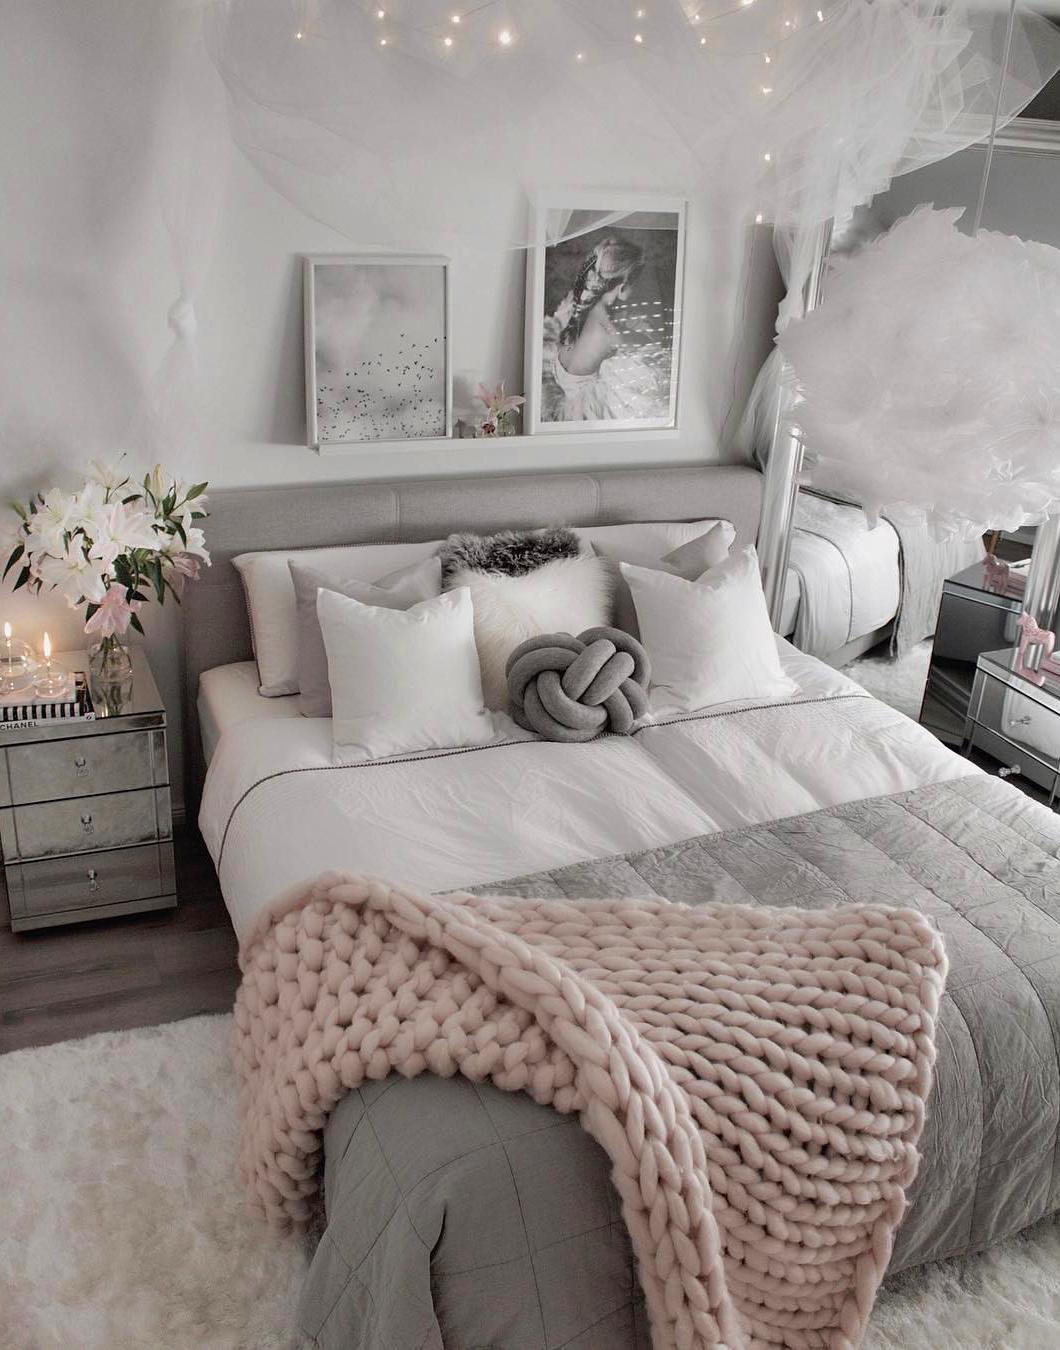 50+ Master Bedroom Decor Ideas For You;bedroom ideas master;bedroom decor ideas #bedroom